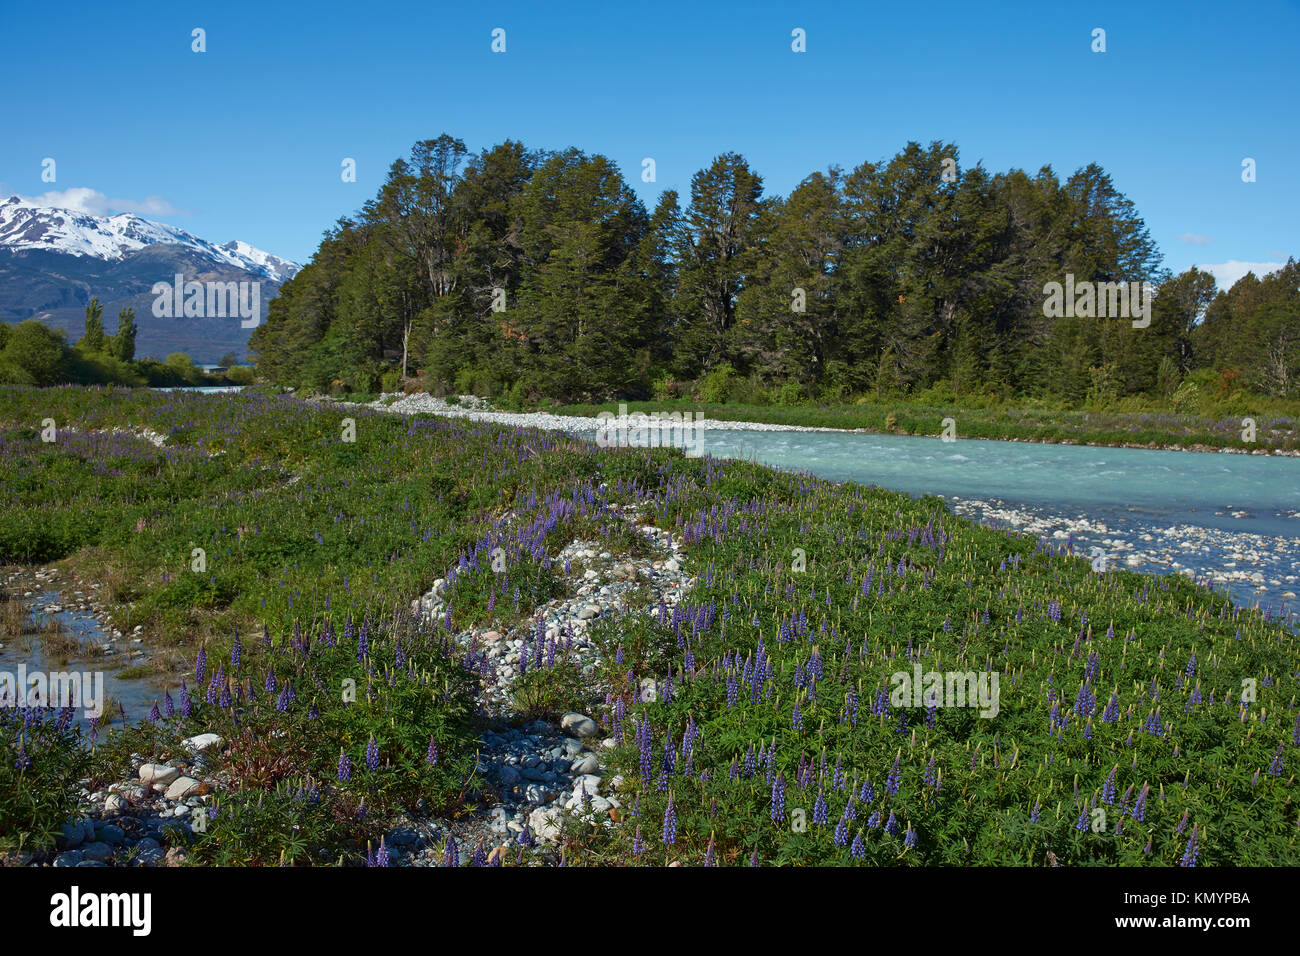 Spring in Patagonia. Lupins flowering on the banks of the Rio el Canal along the Carretera Austral in southern Chile. Stock Photo